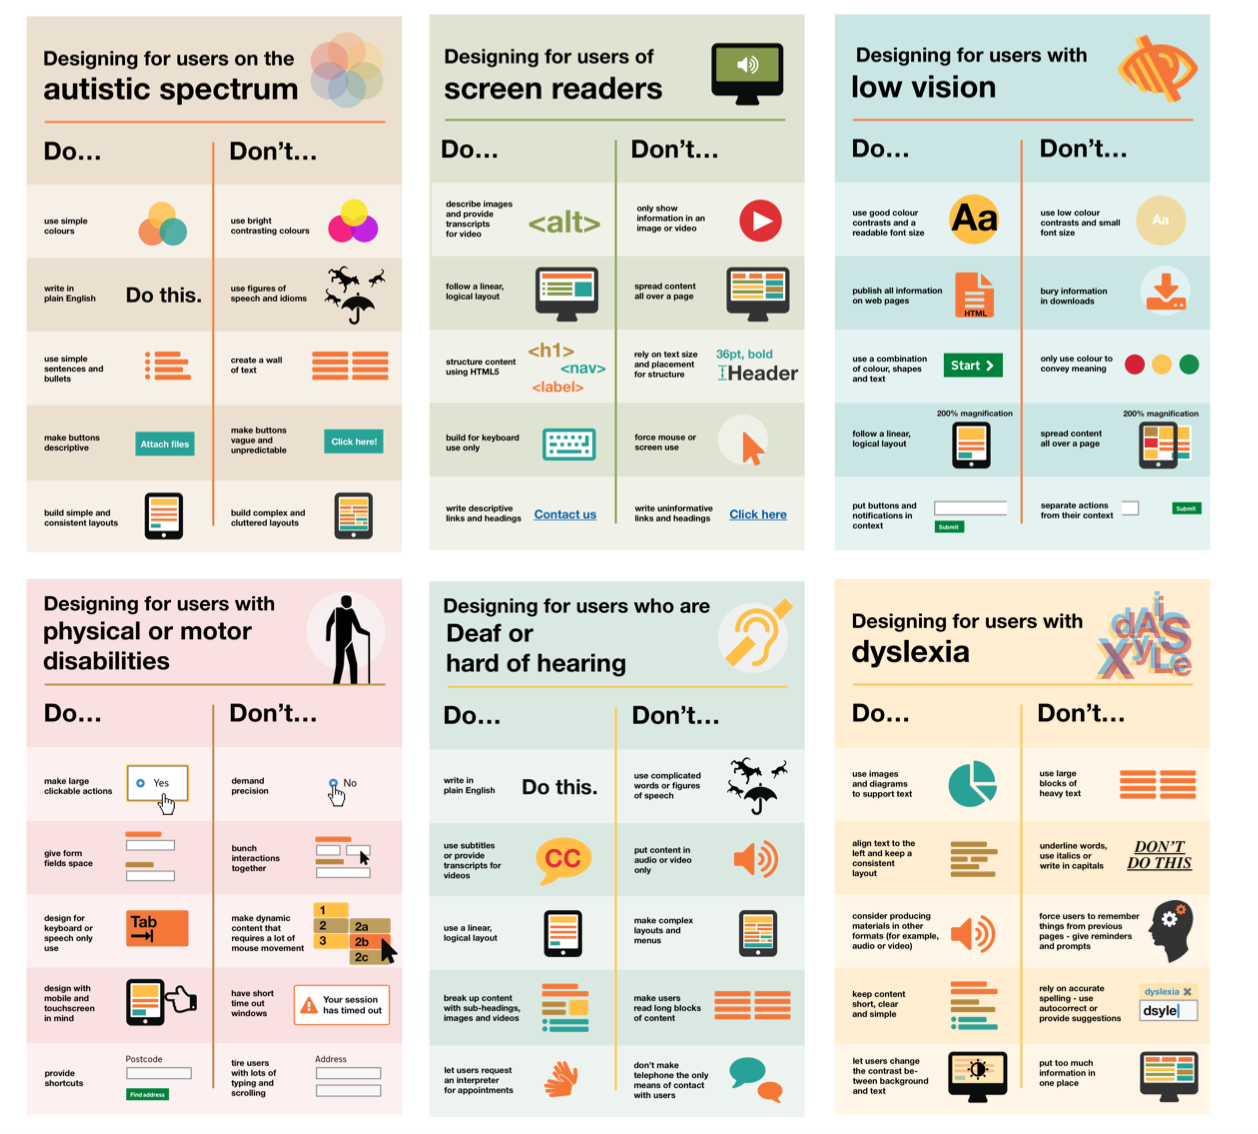 Accessibility Guideline Posters via the UK Accessibility Office https://accessibility.blog.gov.uk/2016/09/02/dos-and-donts-on-designing-for-accessibility/